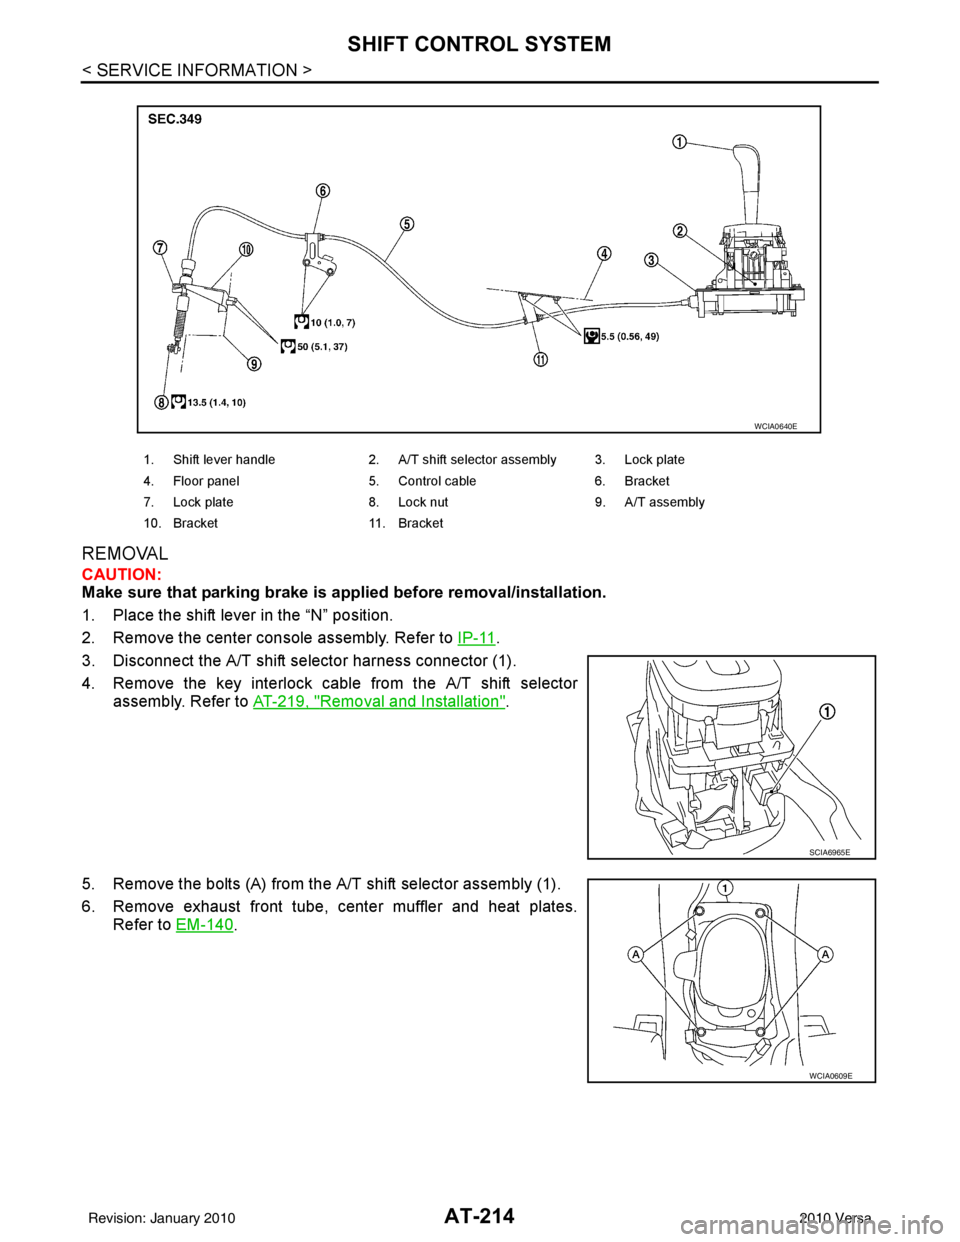 NISSAN LATIO 2010  Service Repair Manual AT-214
< SERVICE INFORMATION >
SHIFT CONTROL SYSTEM
REMOVAL
CAUTION:
Make sure that parking brake is applied before removal/installation.
1. Place the shift lever in the “N” position.
2. Remove th